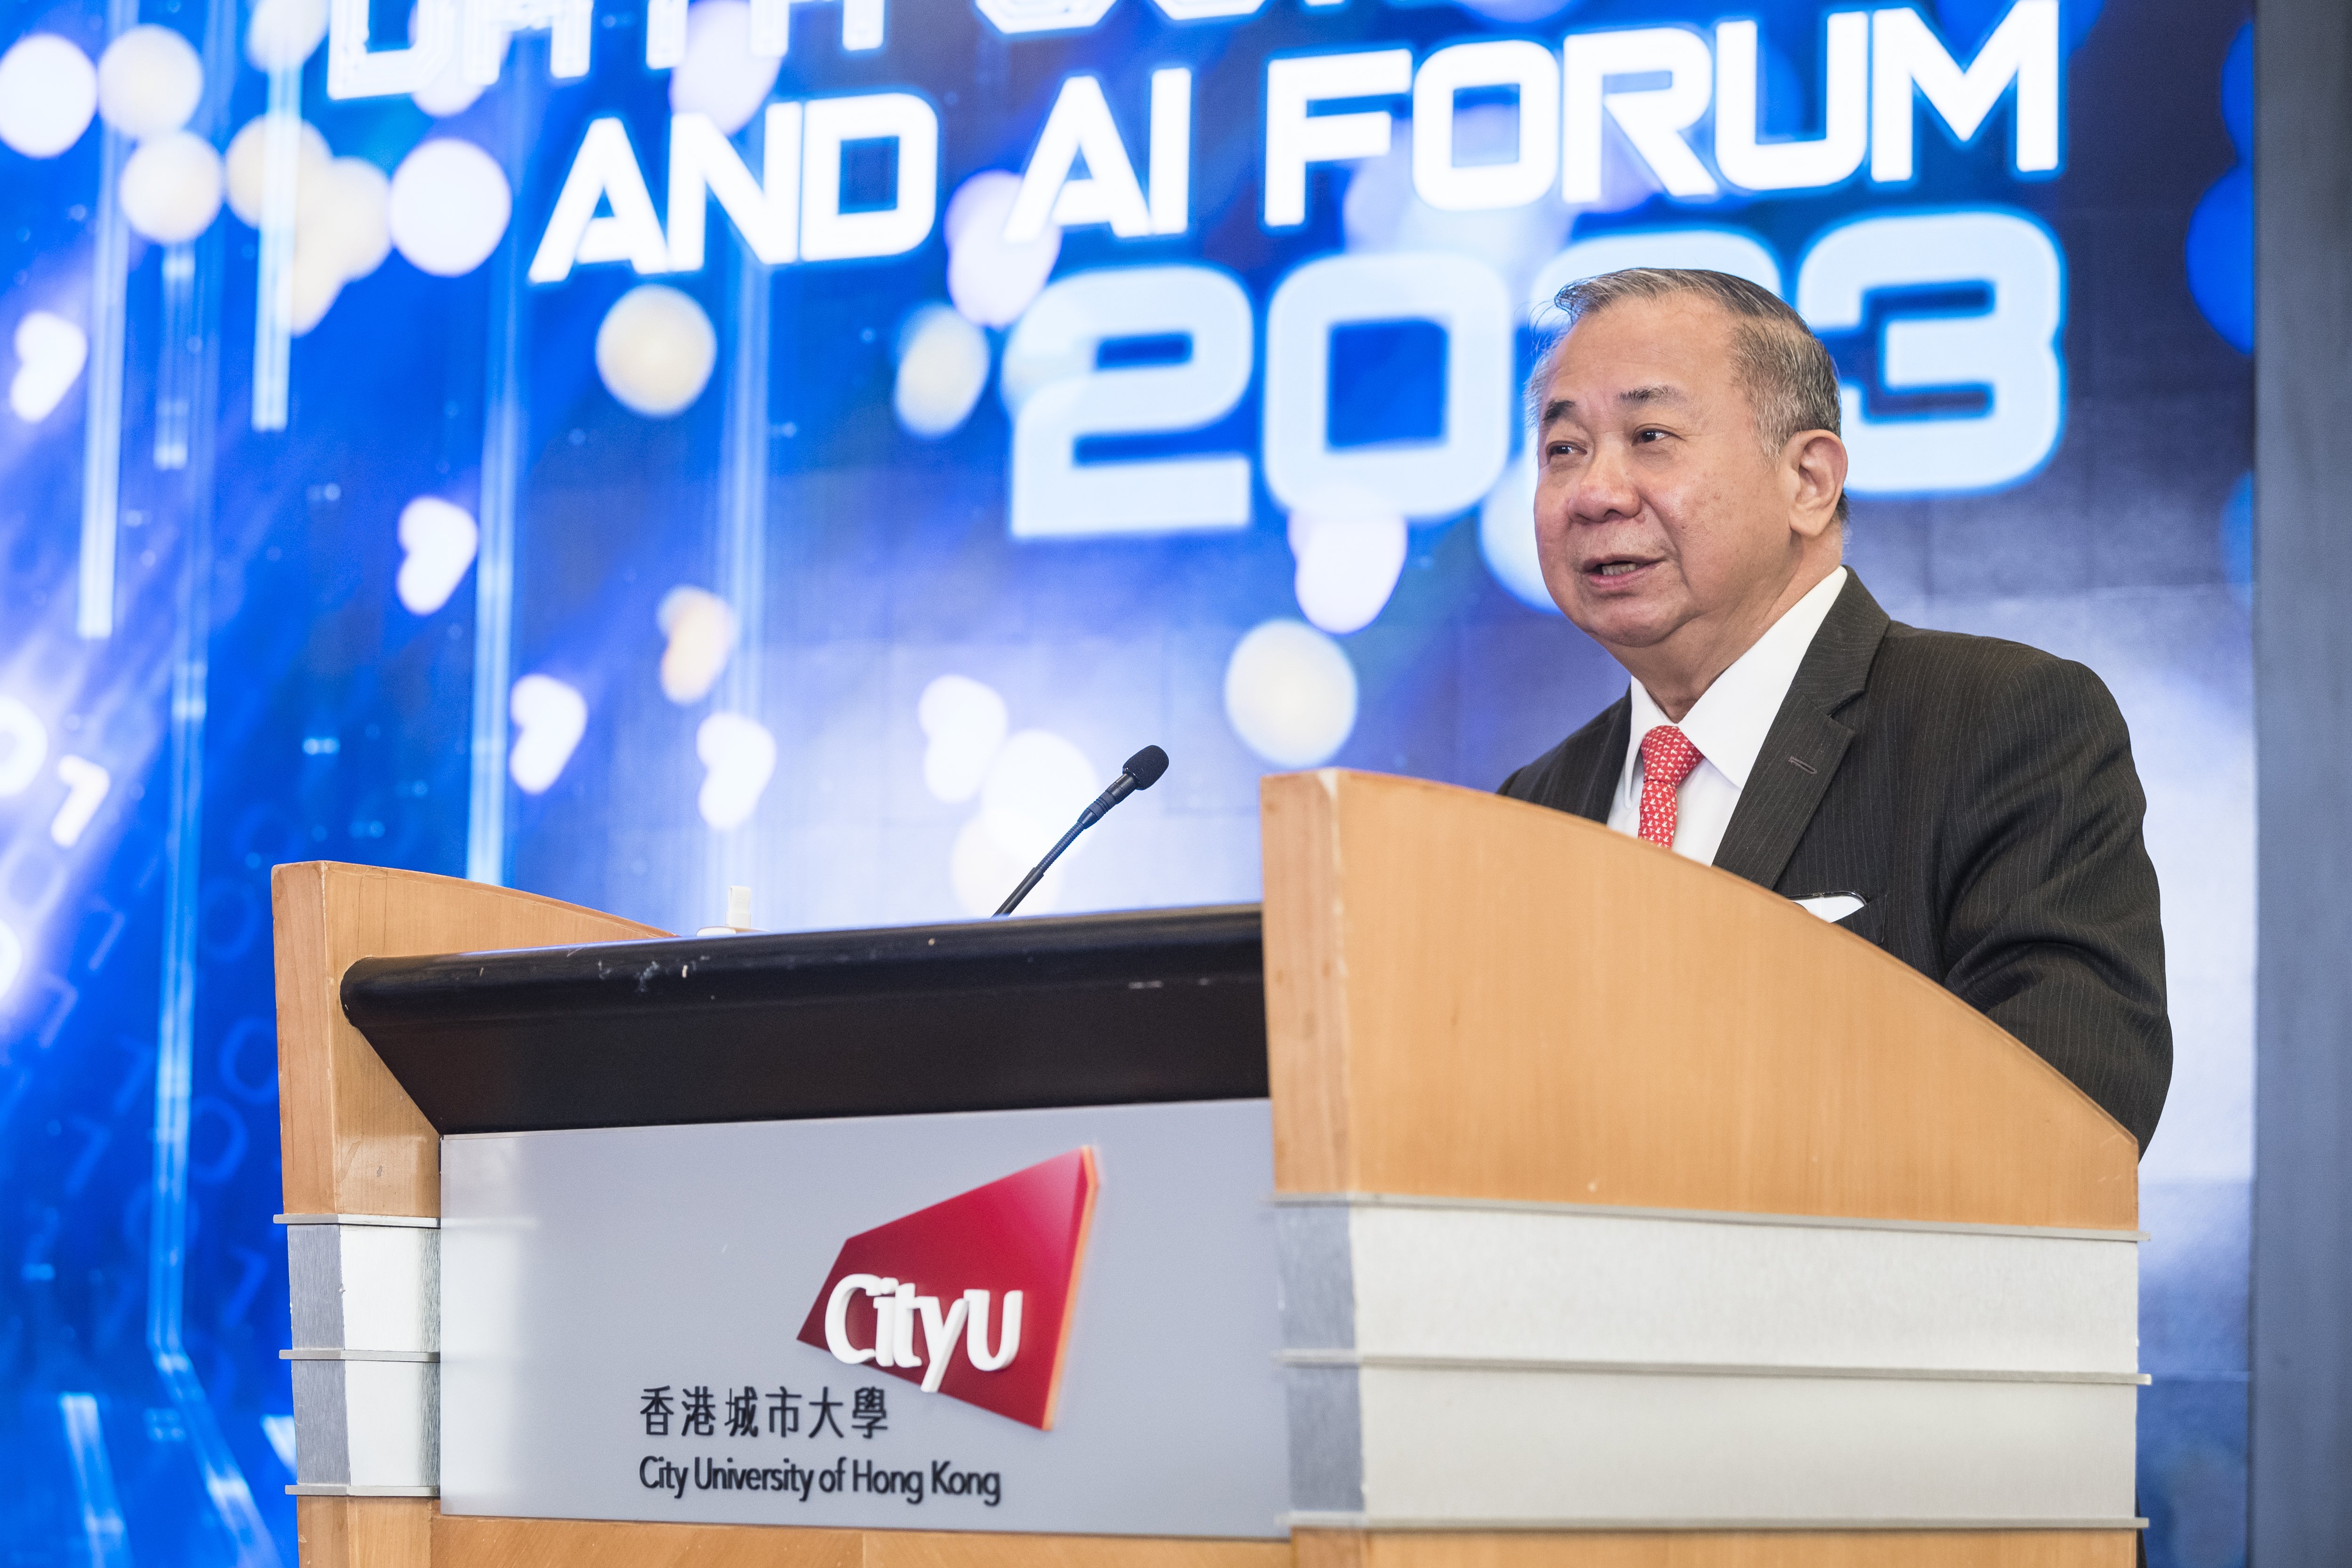 President Boey stressed the importance of universities being more learning-centric.